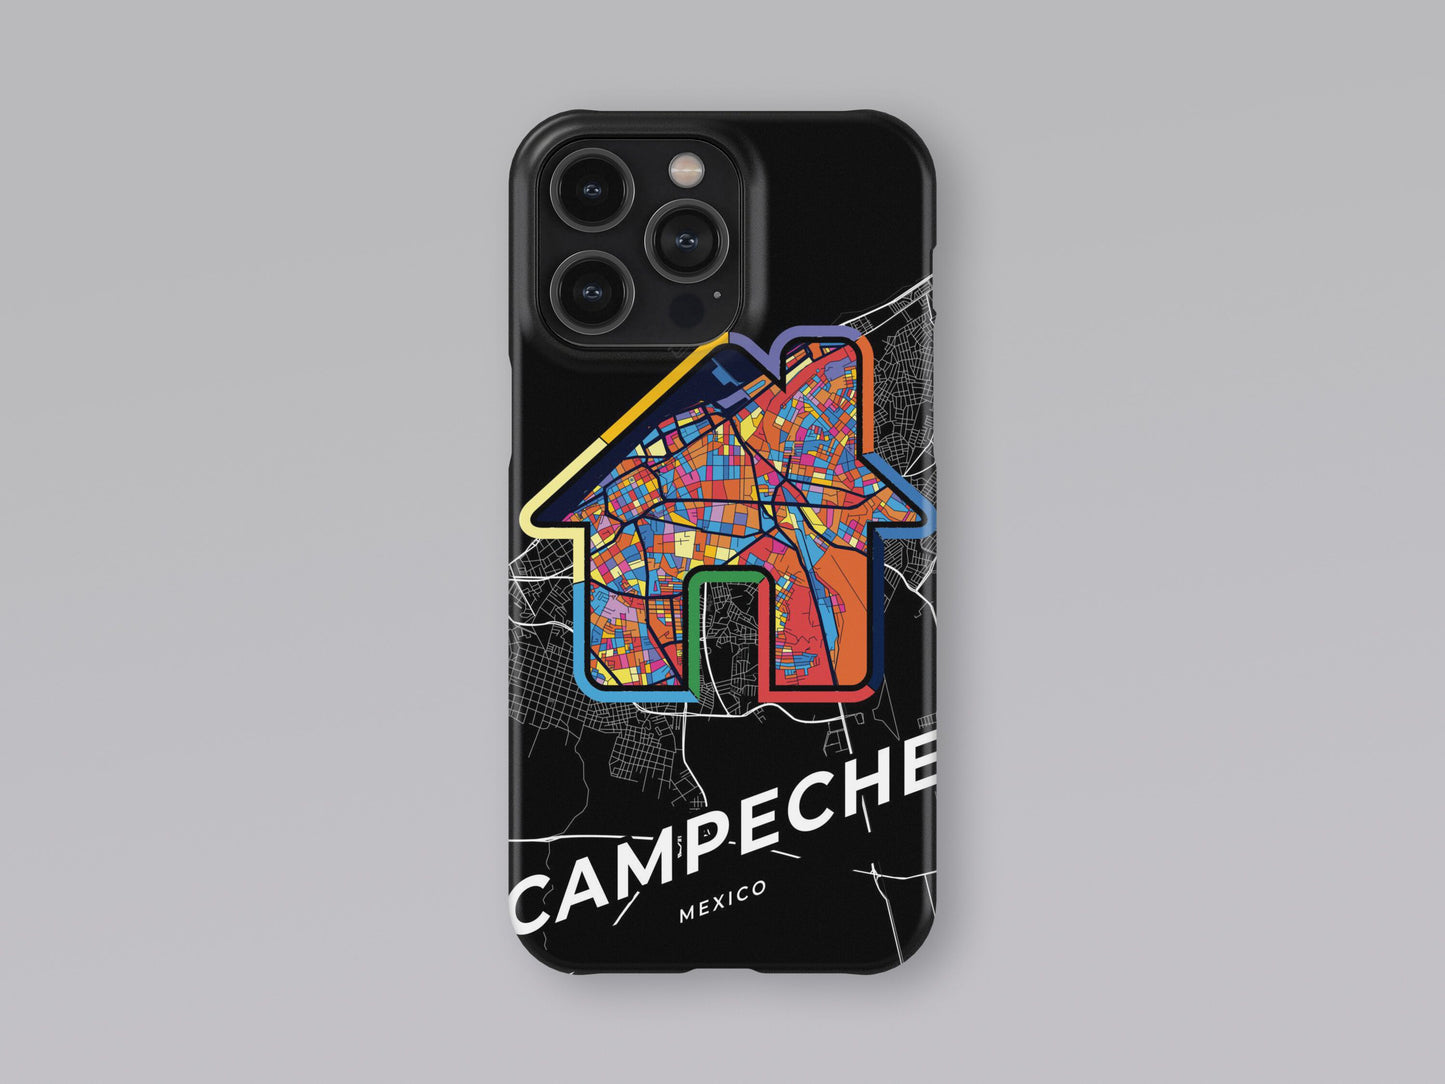 Campeche Mexico slim phone case with colorful icon. Birthday, wedding or housewarming gift. Couple match cases. 3